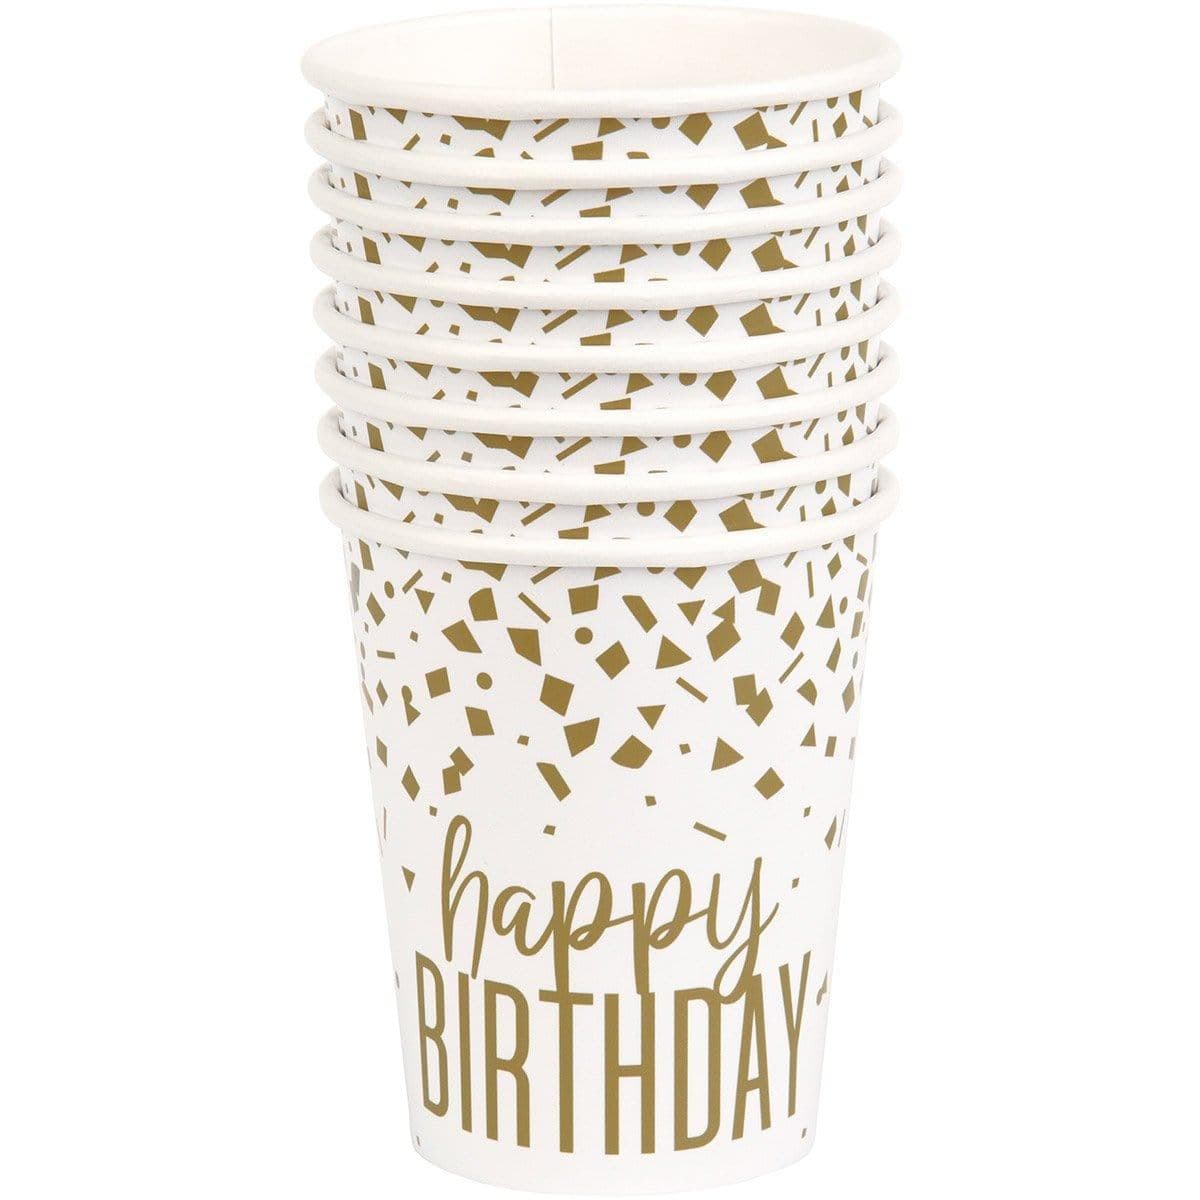 Buy General Birthday Gold Confetti Birthday Cups, 9 oz., 8 Count sold at Party Expert